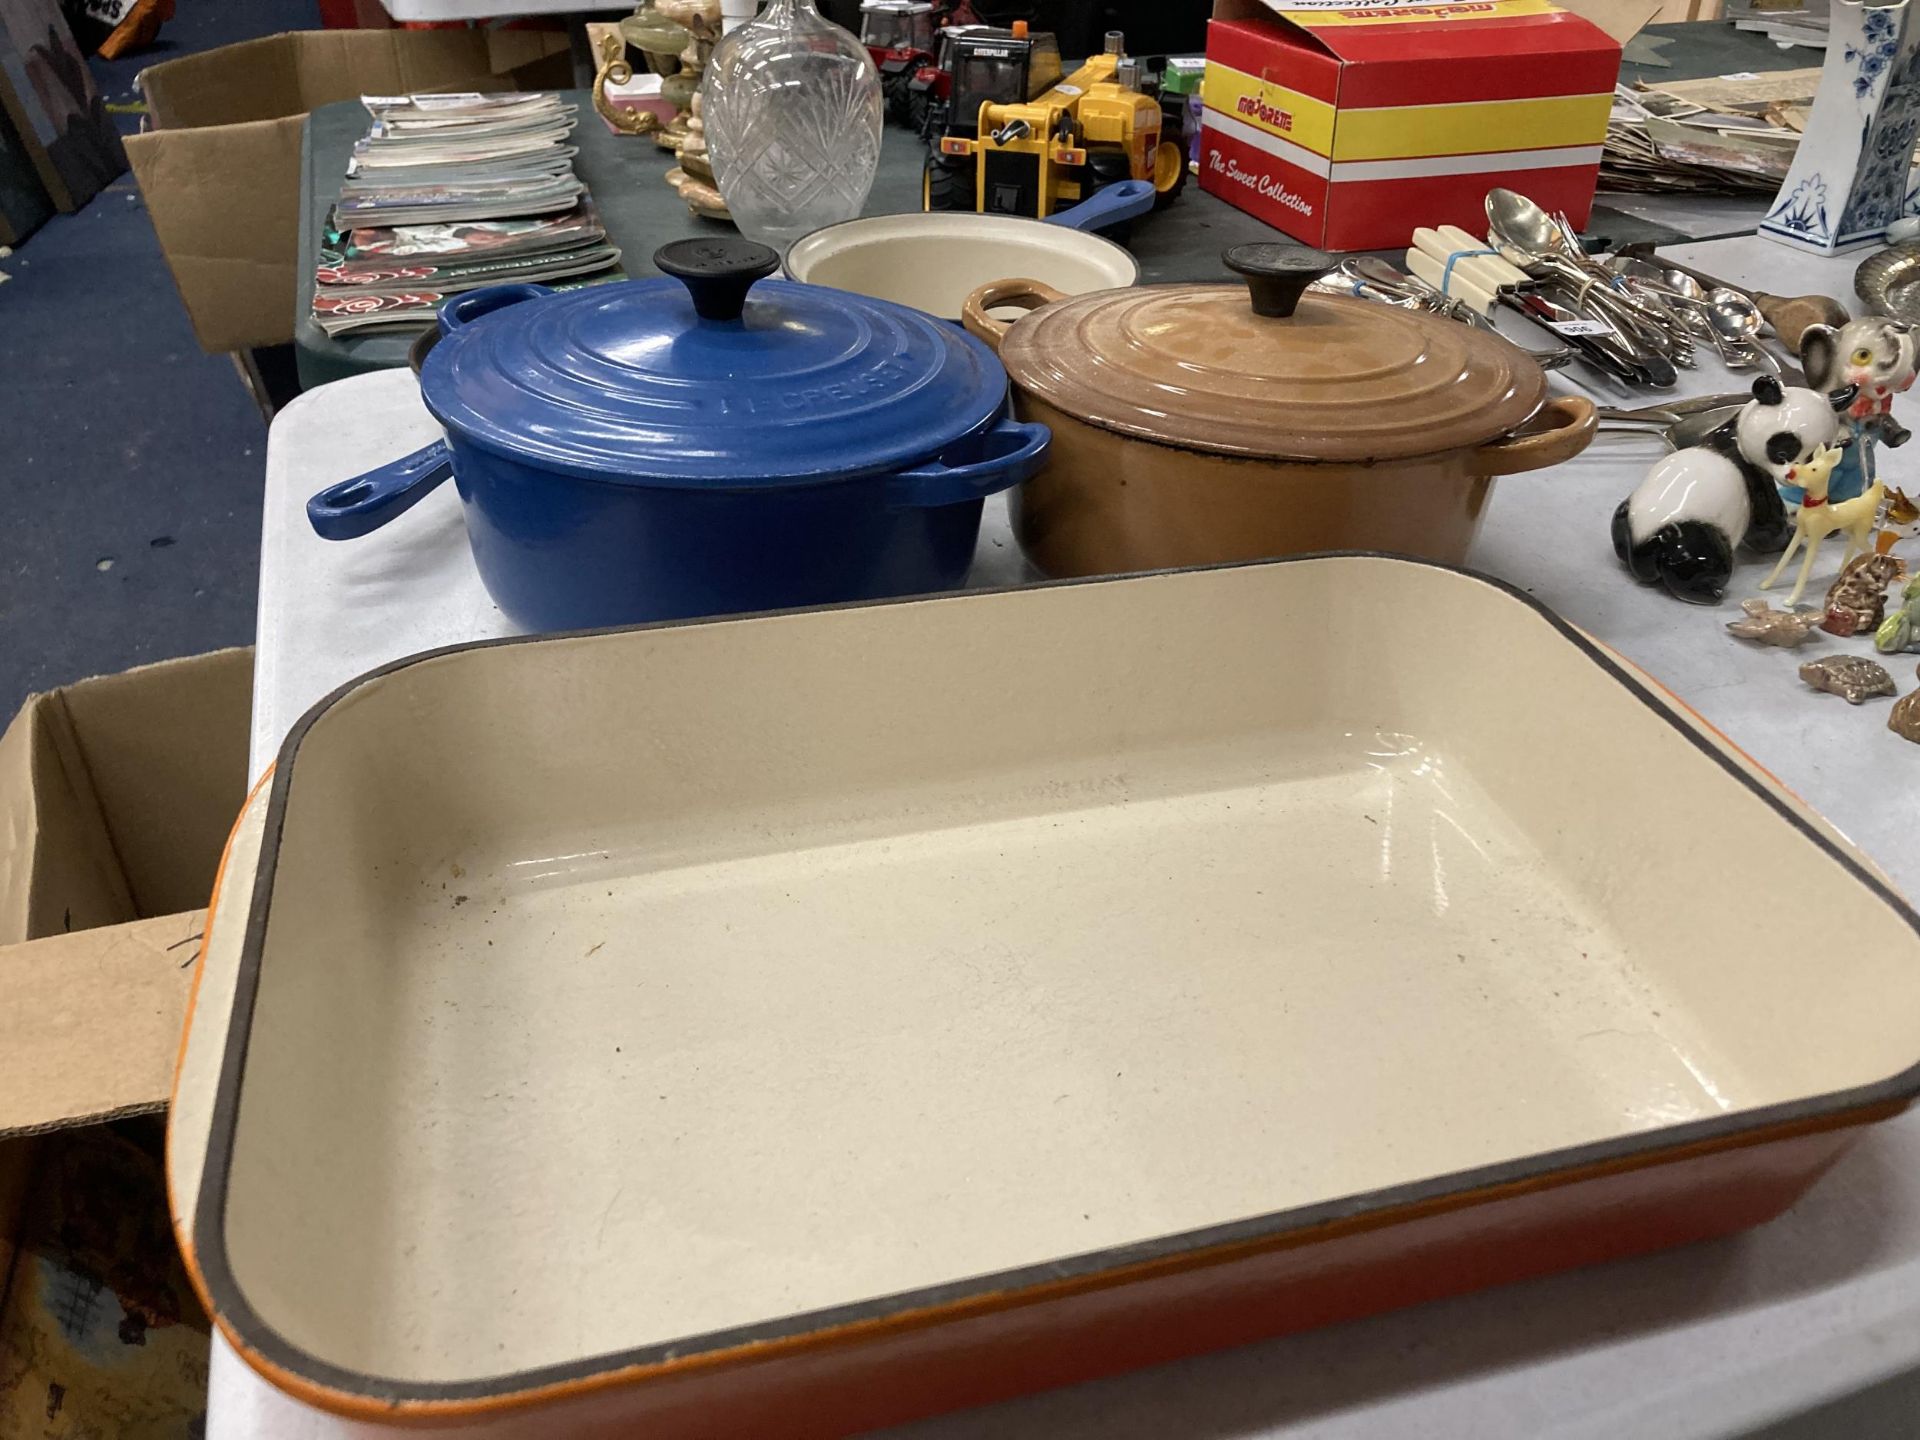 FIVE PIECES OF LE CREUSET COOKWARE TO INCLUDE LIDDED CASSEROLE DISHES, A FLAN DISH AND PANS - Image 3 of 3